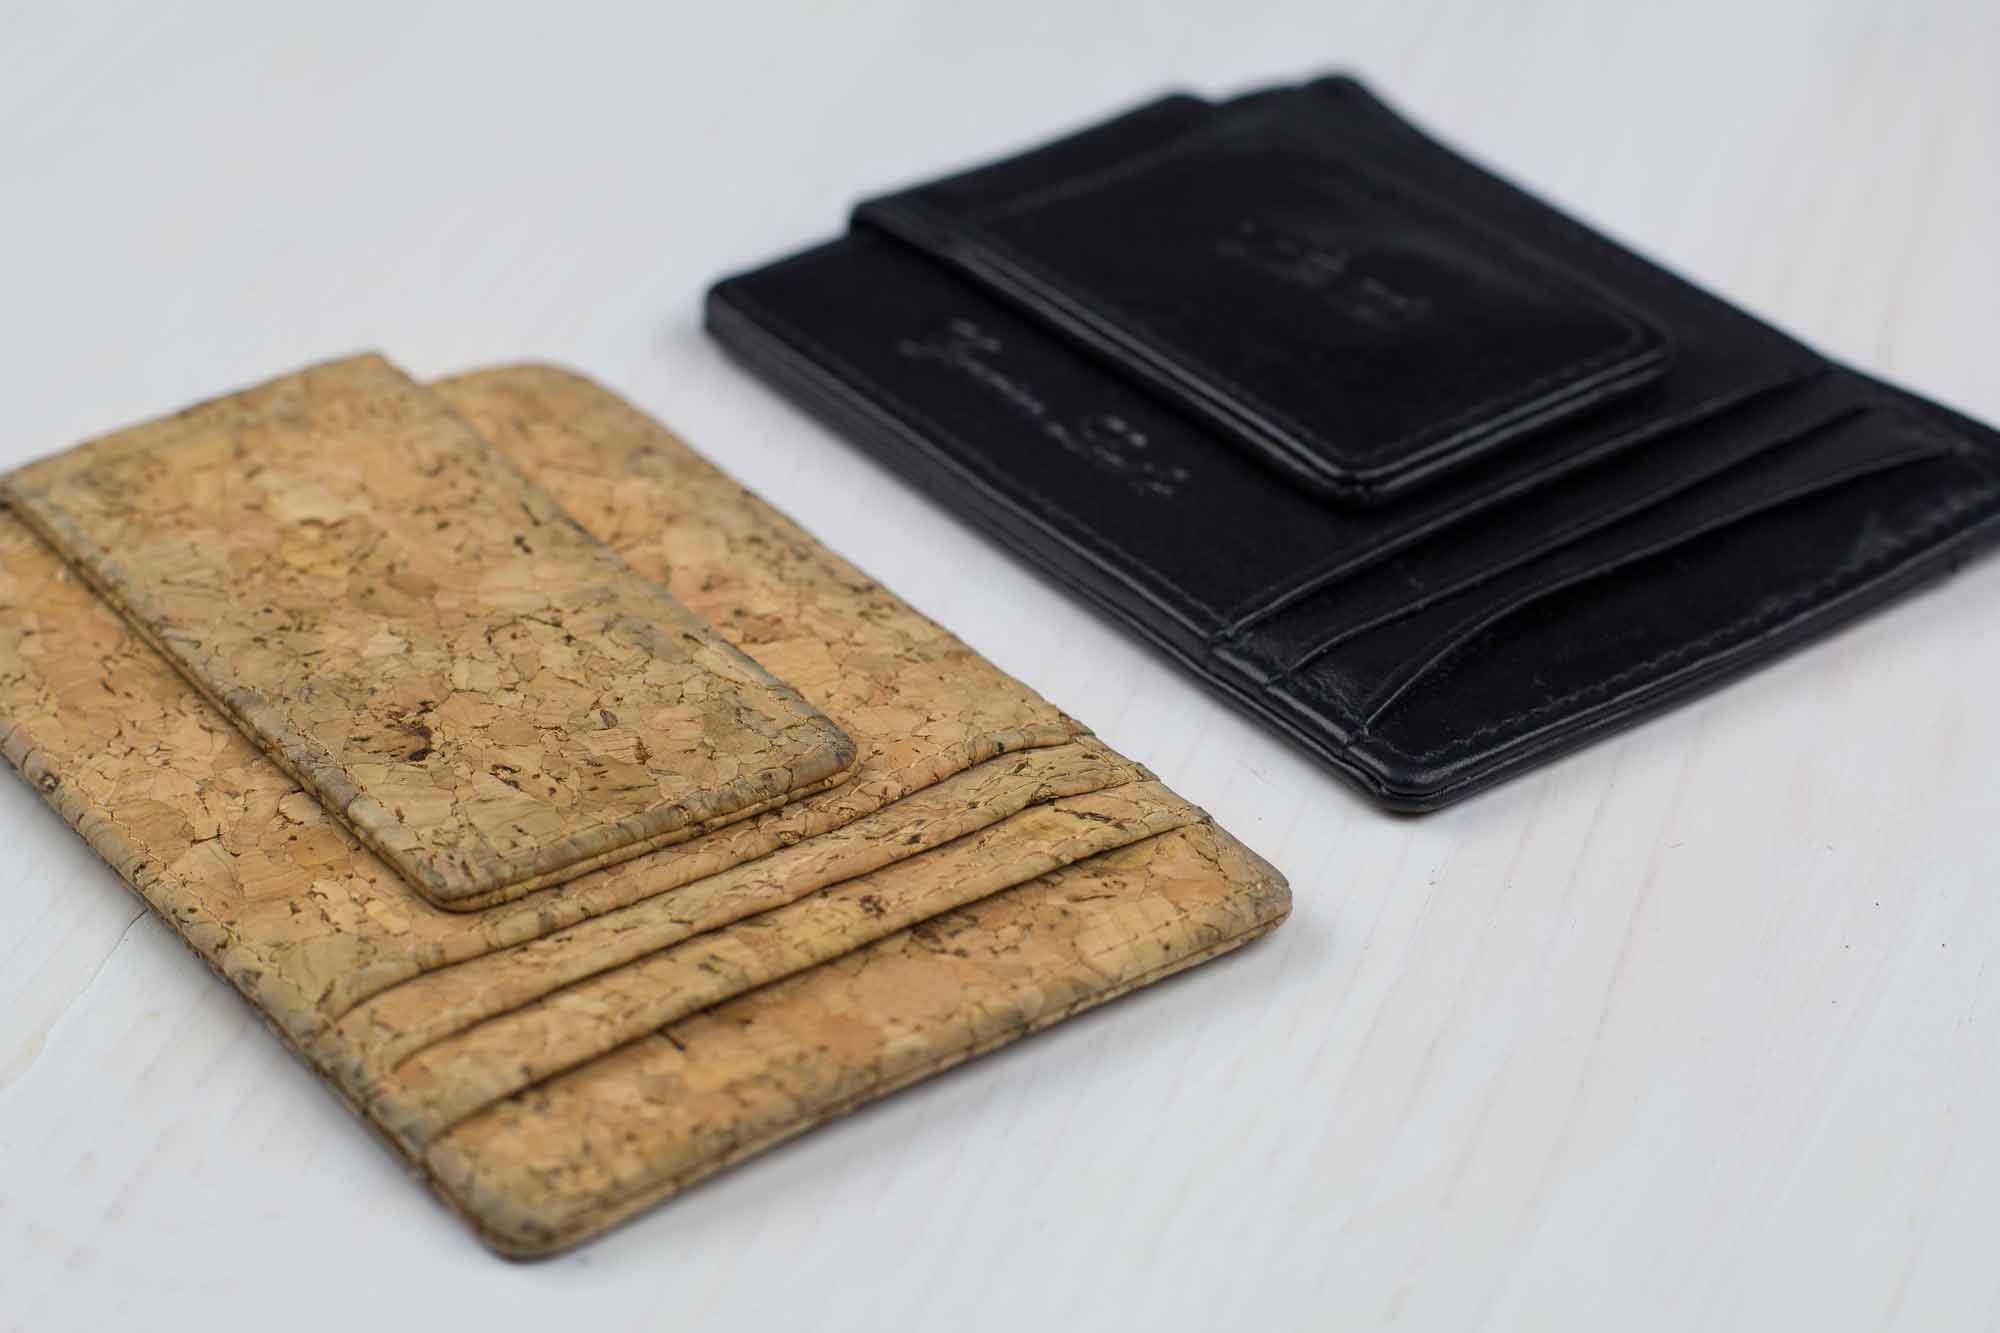 What is the point of money clips when we have wallets?